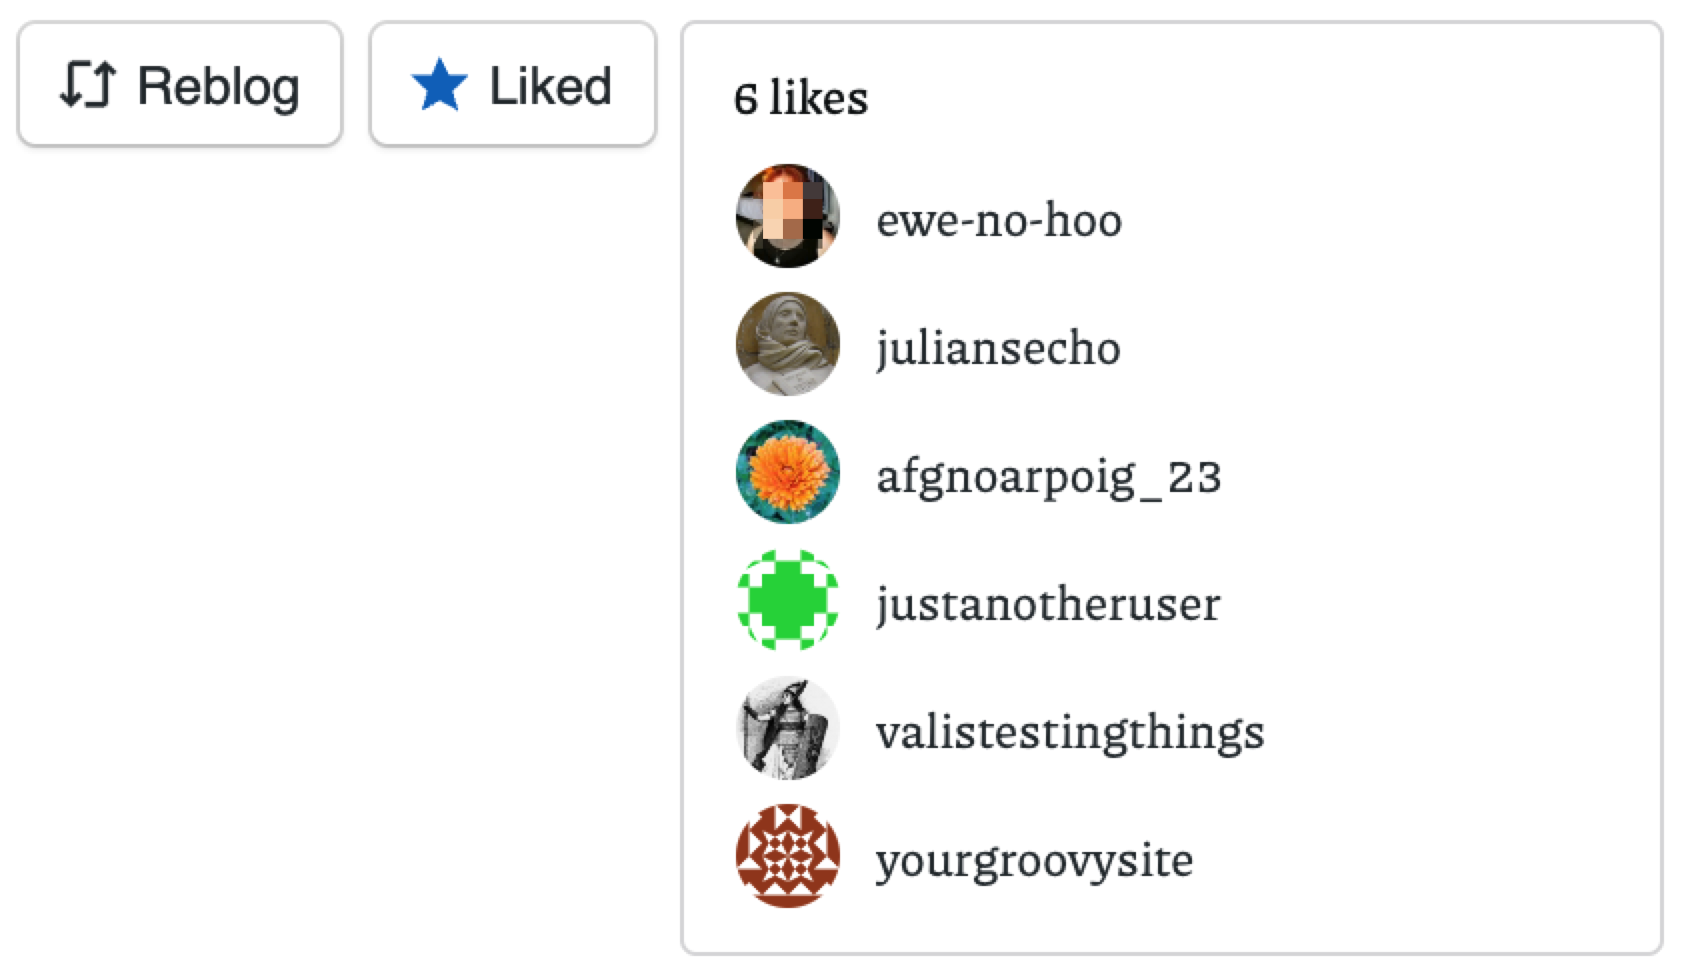 Screenshot of the Reblog and Liked button, showing a scrollable list of six avatars and a like count of 6 likes.